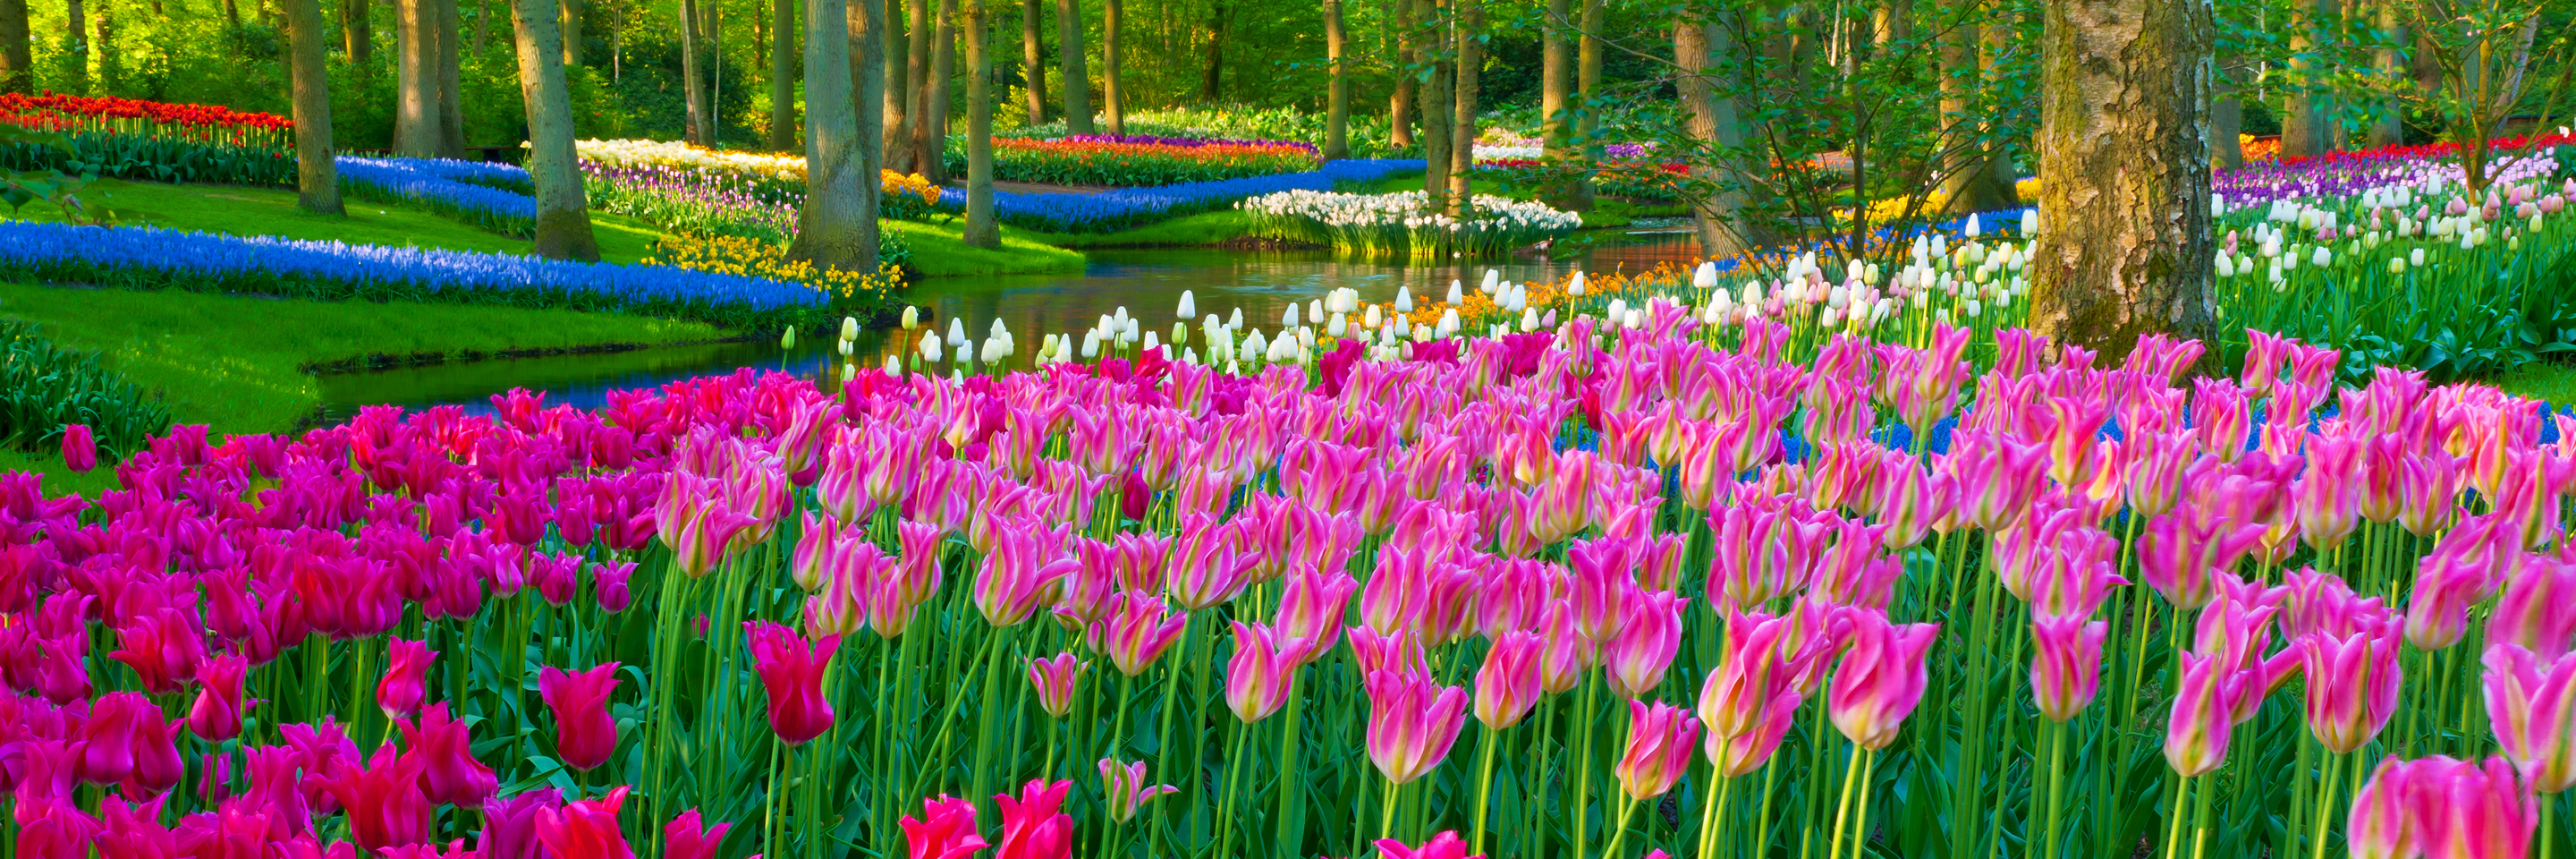 Tulip Time Cruise for Garden & Nature Lovers